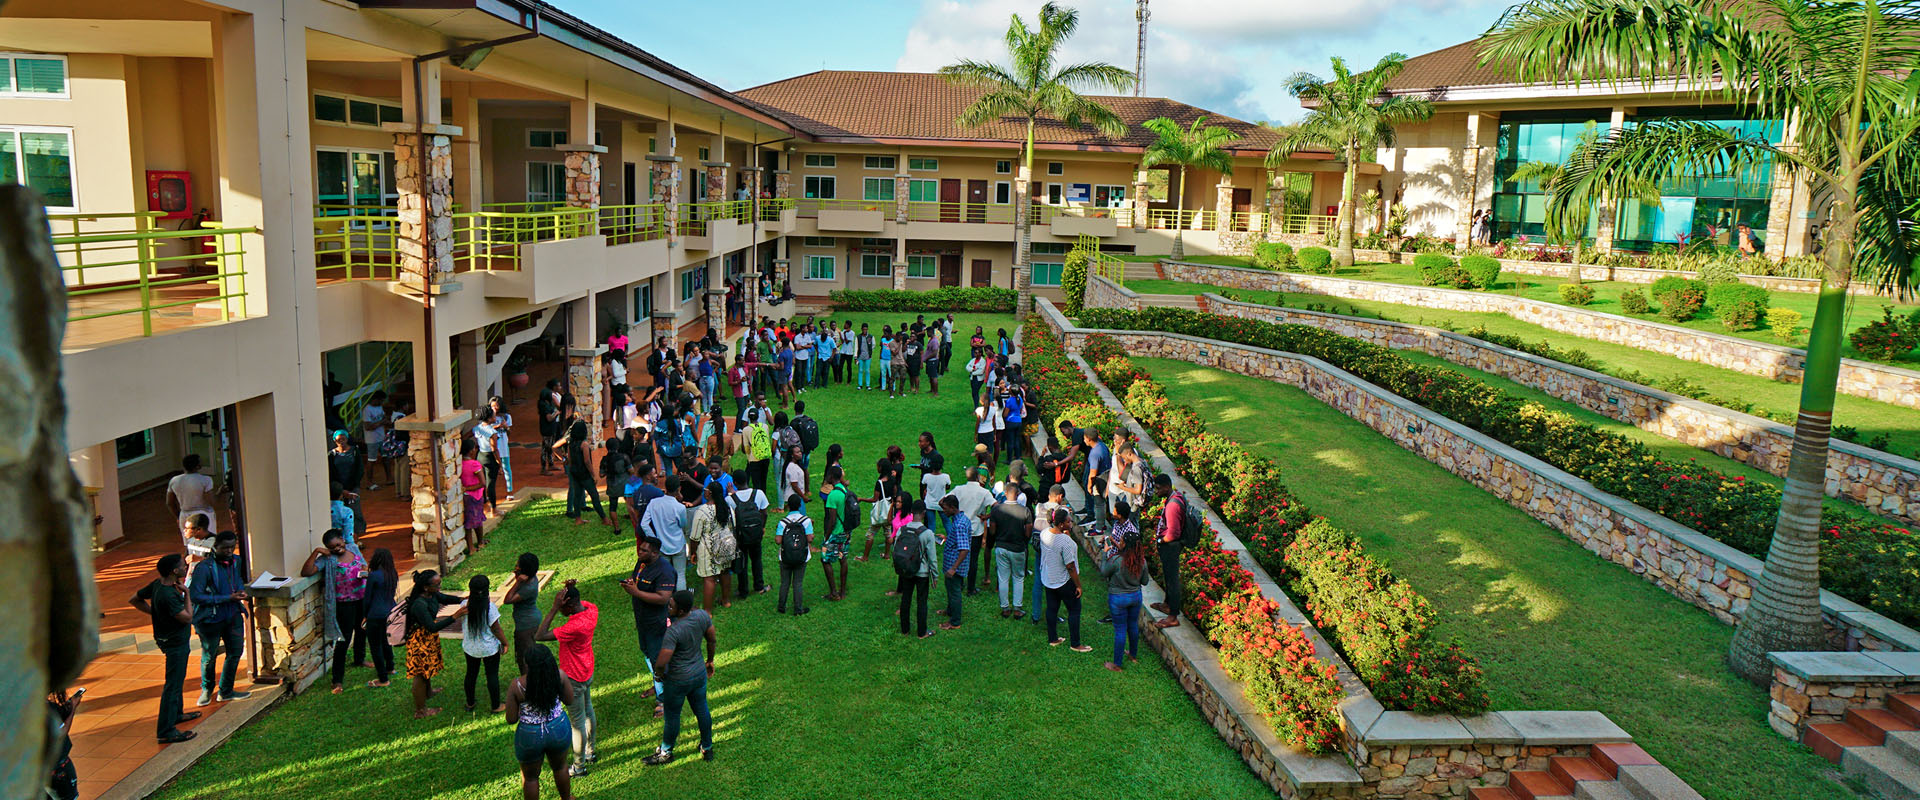 <p>Click here to explore our campus through a photo collage</p>